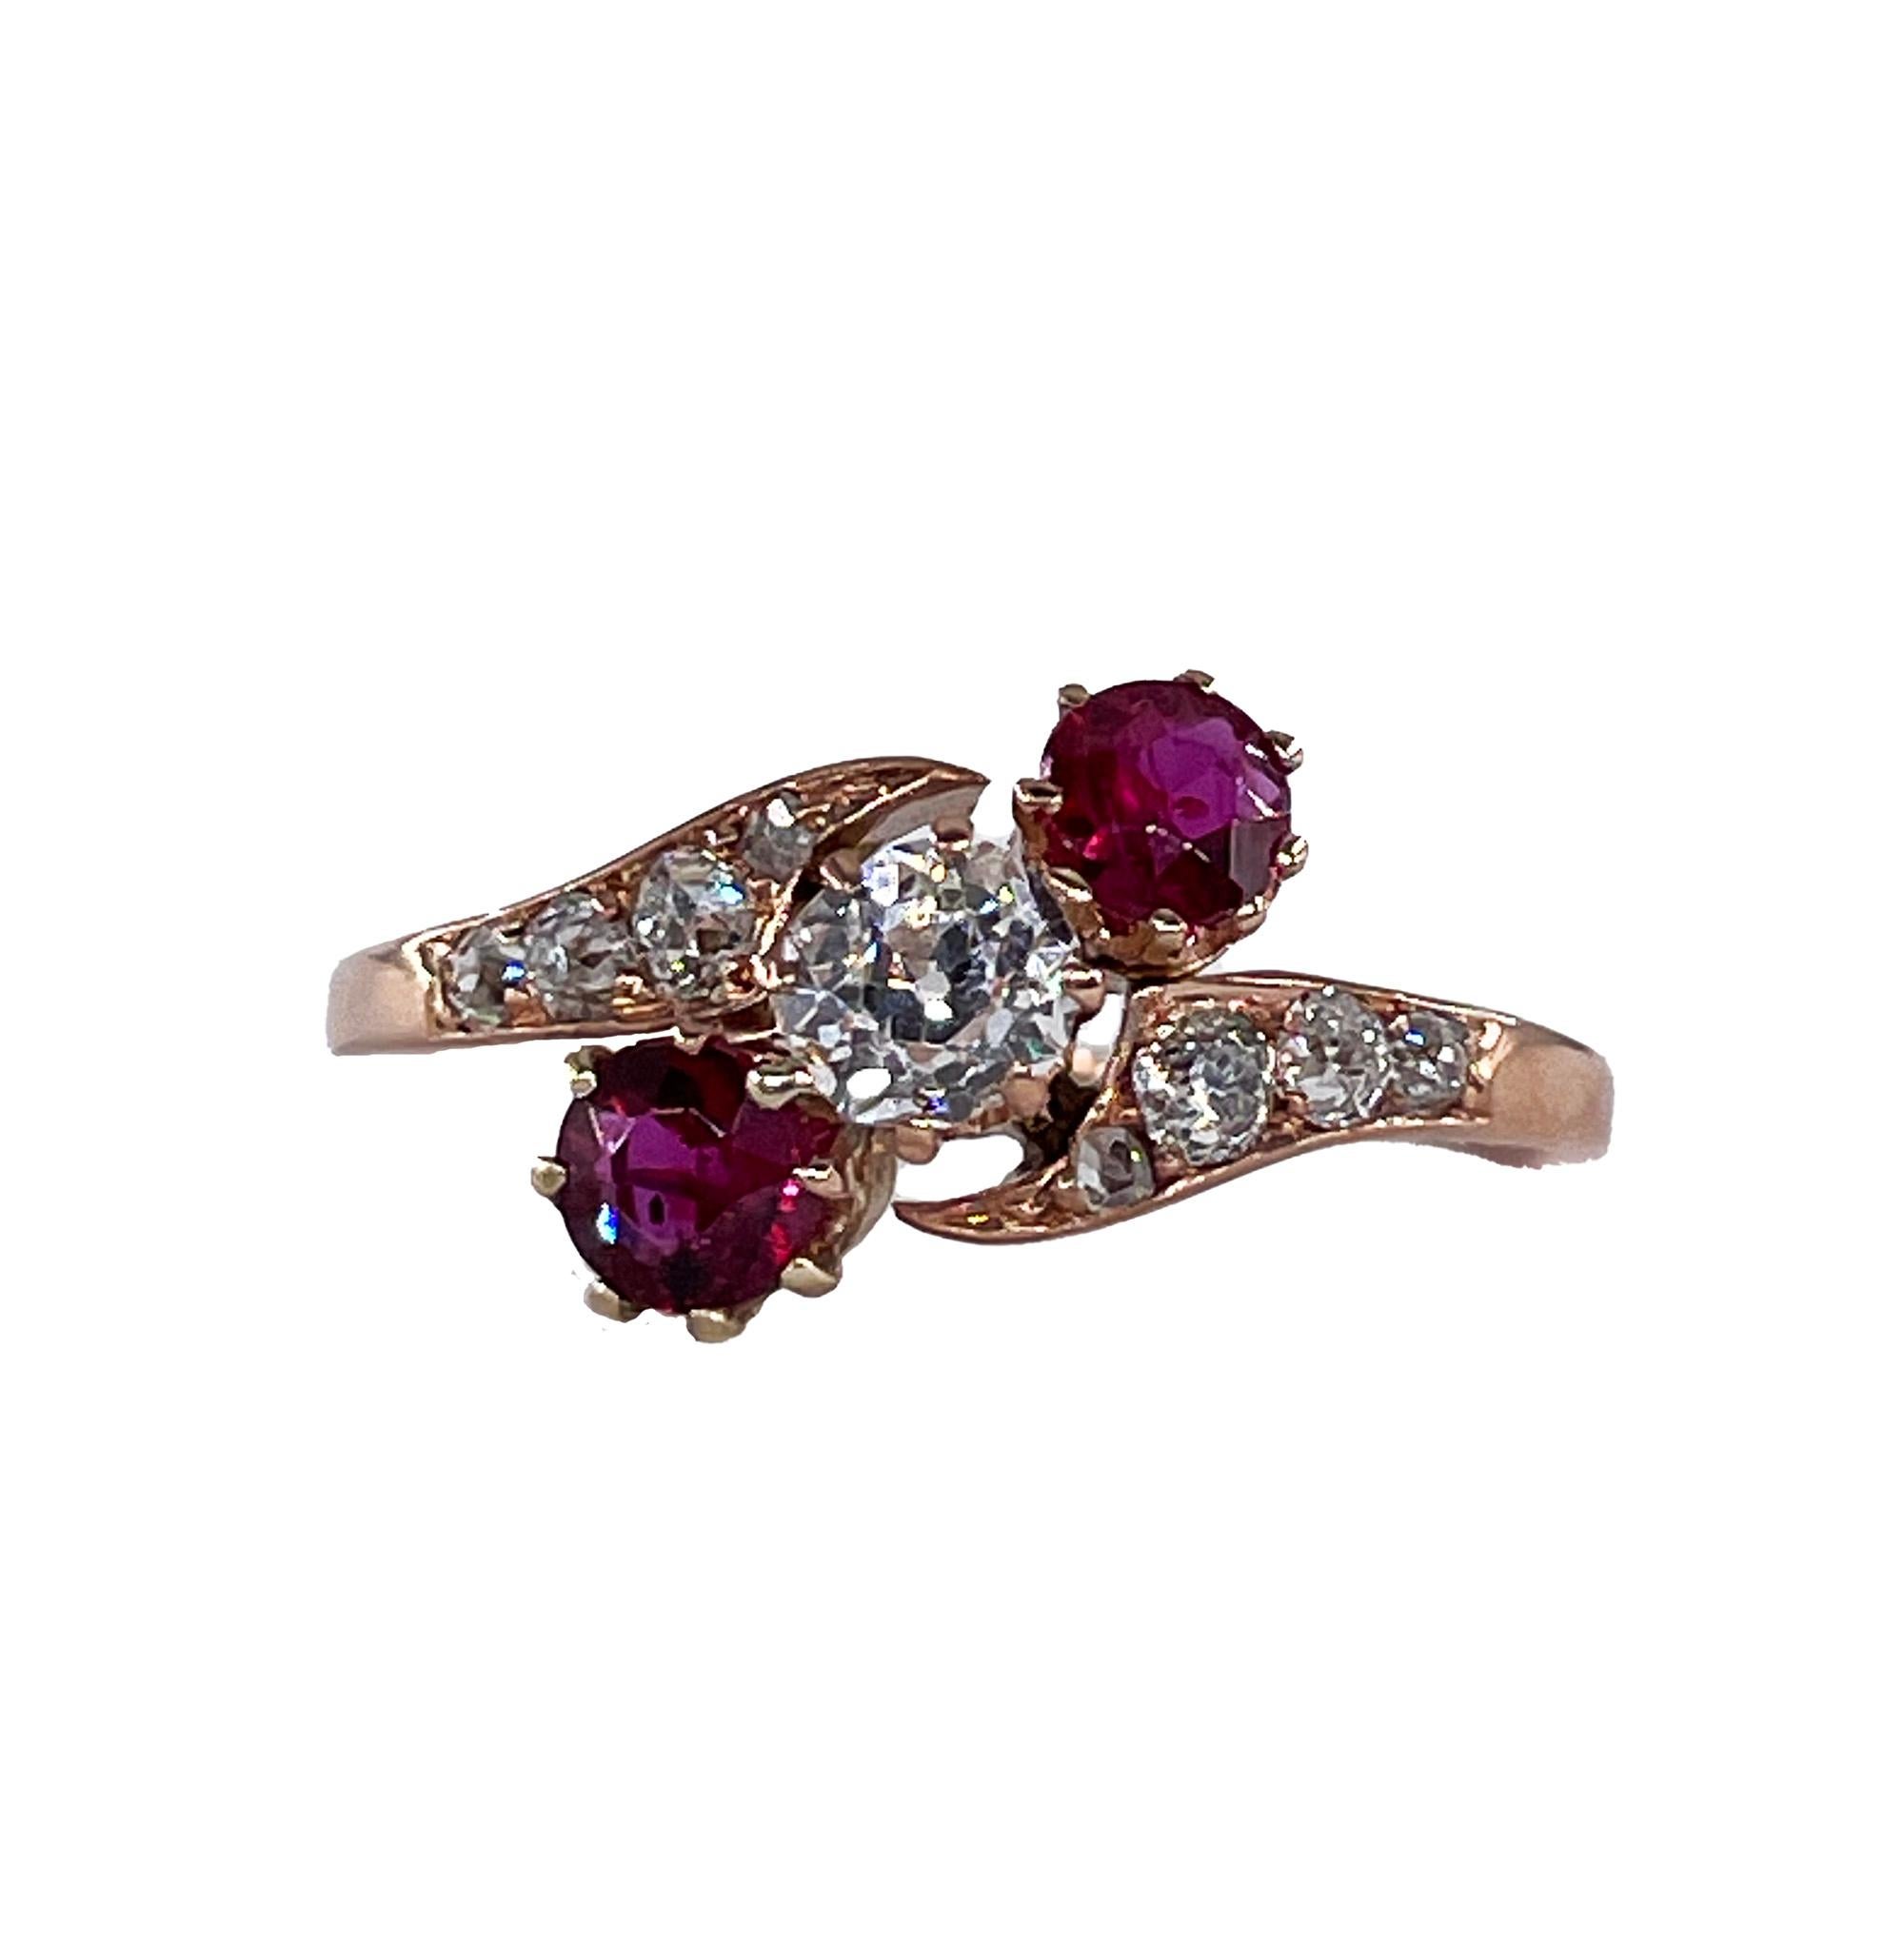 Edwardian Antique Crossover GIA 1.10ct Ruby & Old Mine Cushion DIAMOND Three Stone 14K Gold Ring

A distinctively stunning 1900s delight measuring 3/4 inch long and exotically lovely, the sinuous curves of this sublime Edwardian-era delicacy display